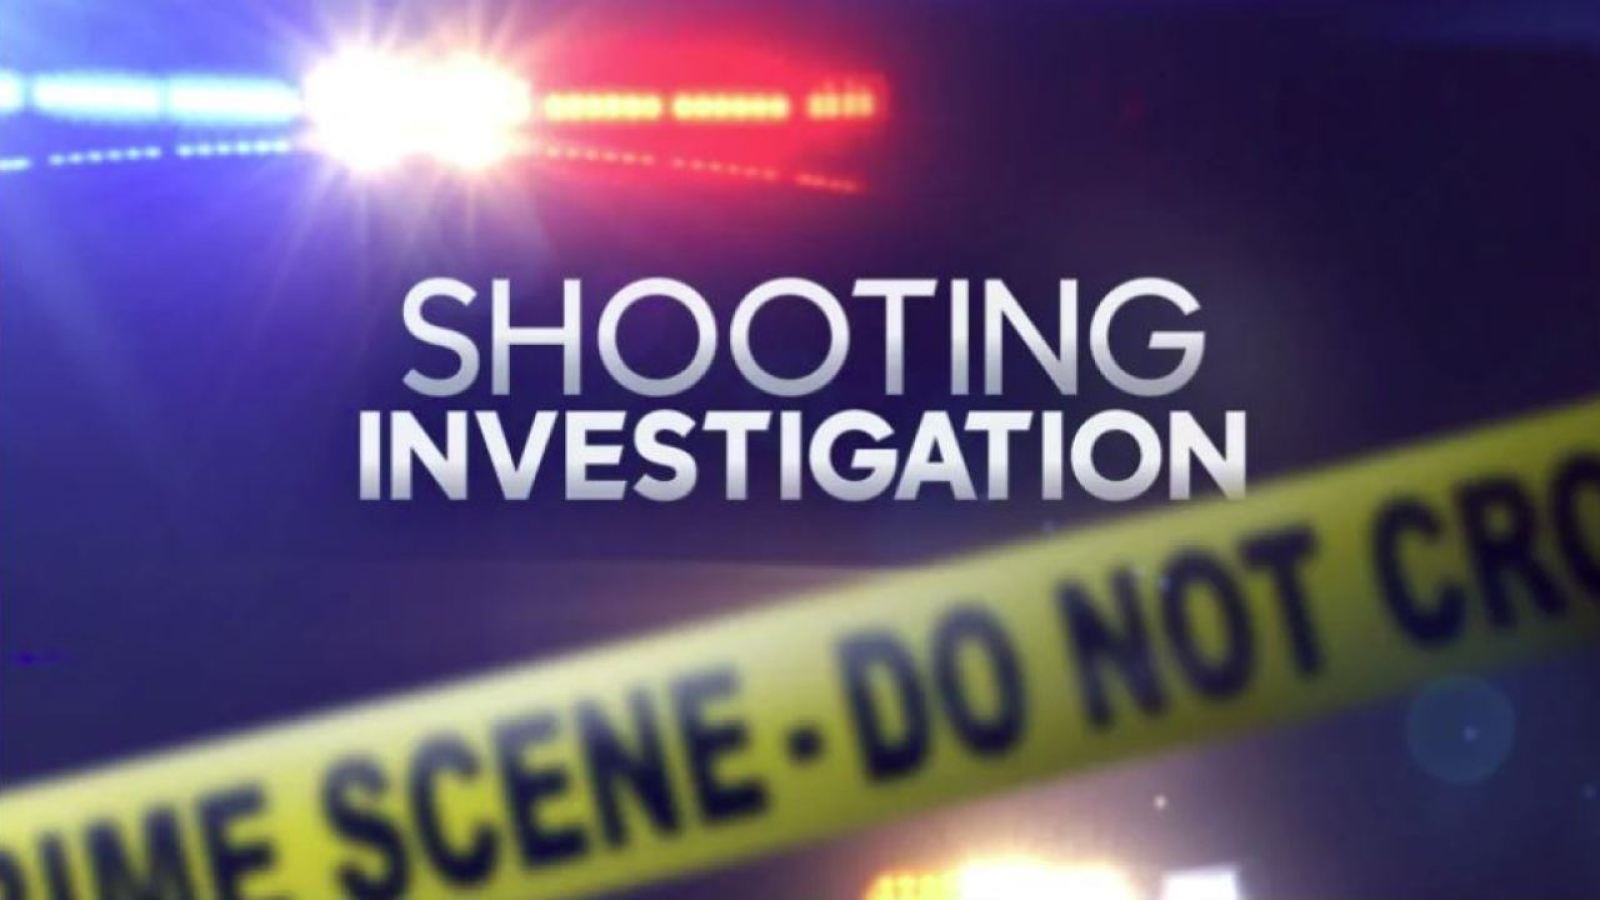 Petersburg Police investigating shooting on River Street, one person injured